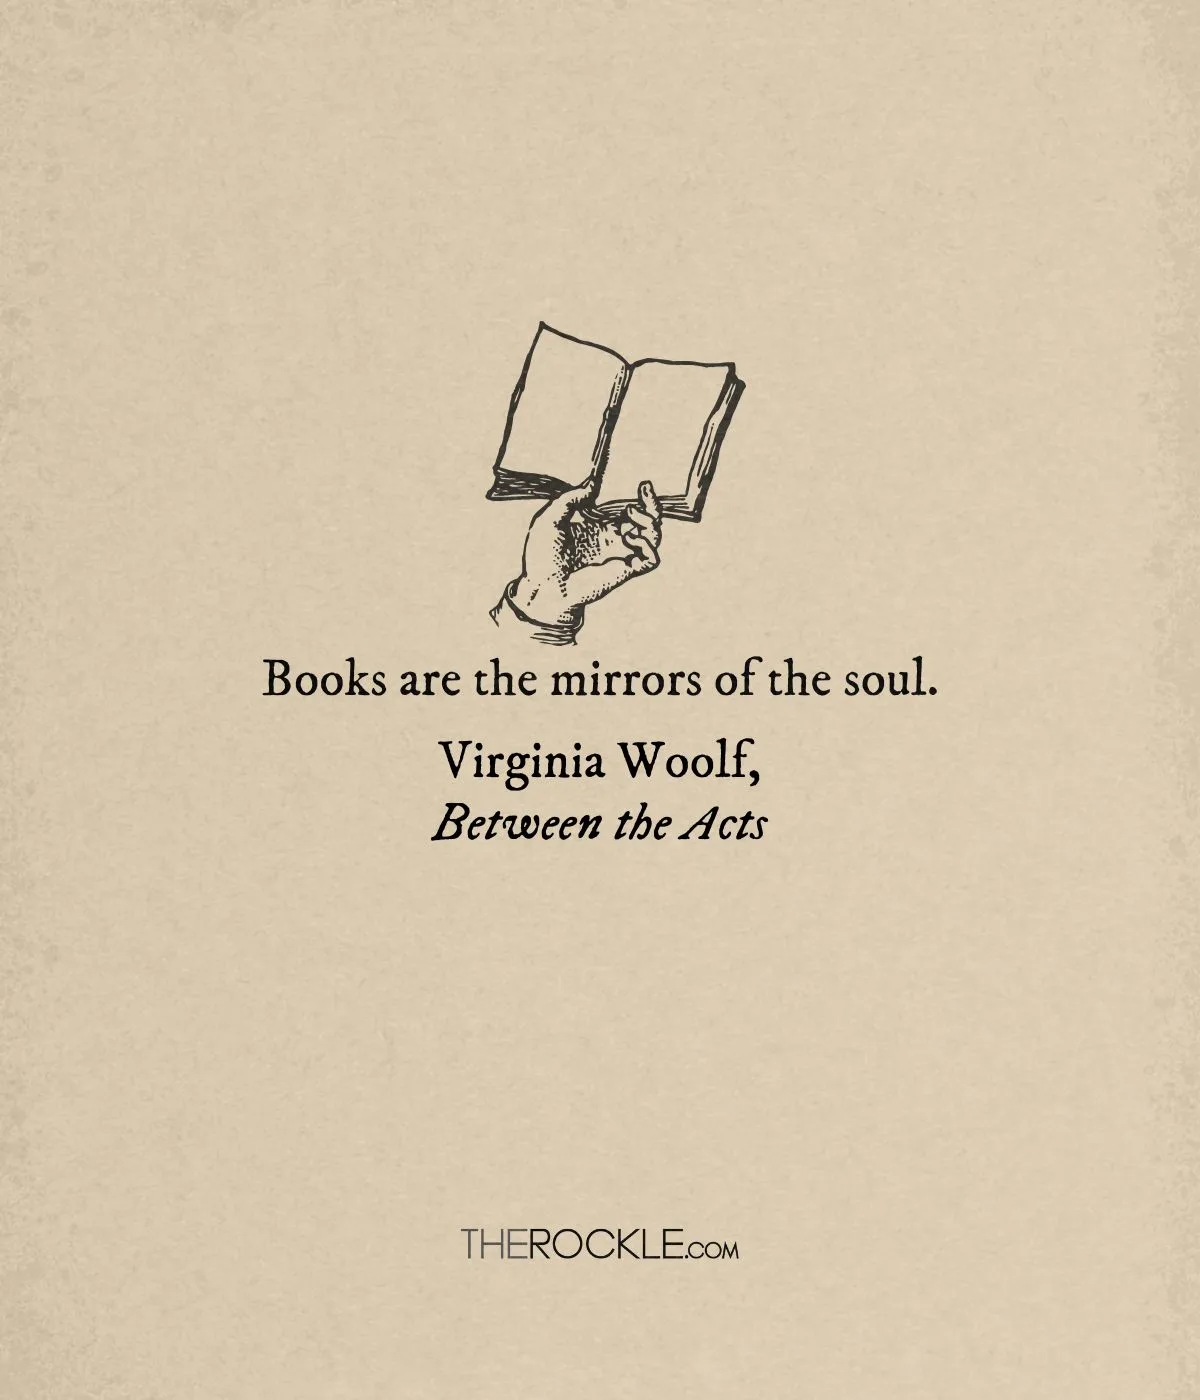 Virginia Woolf quote about books